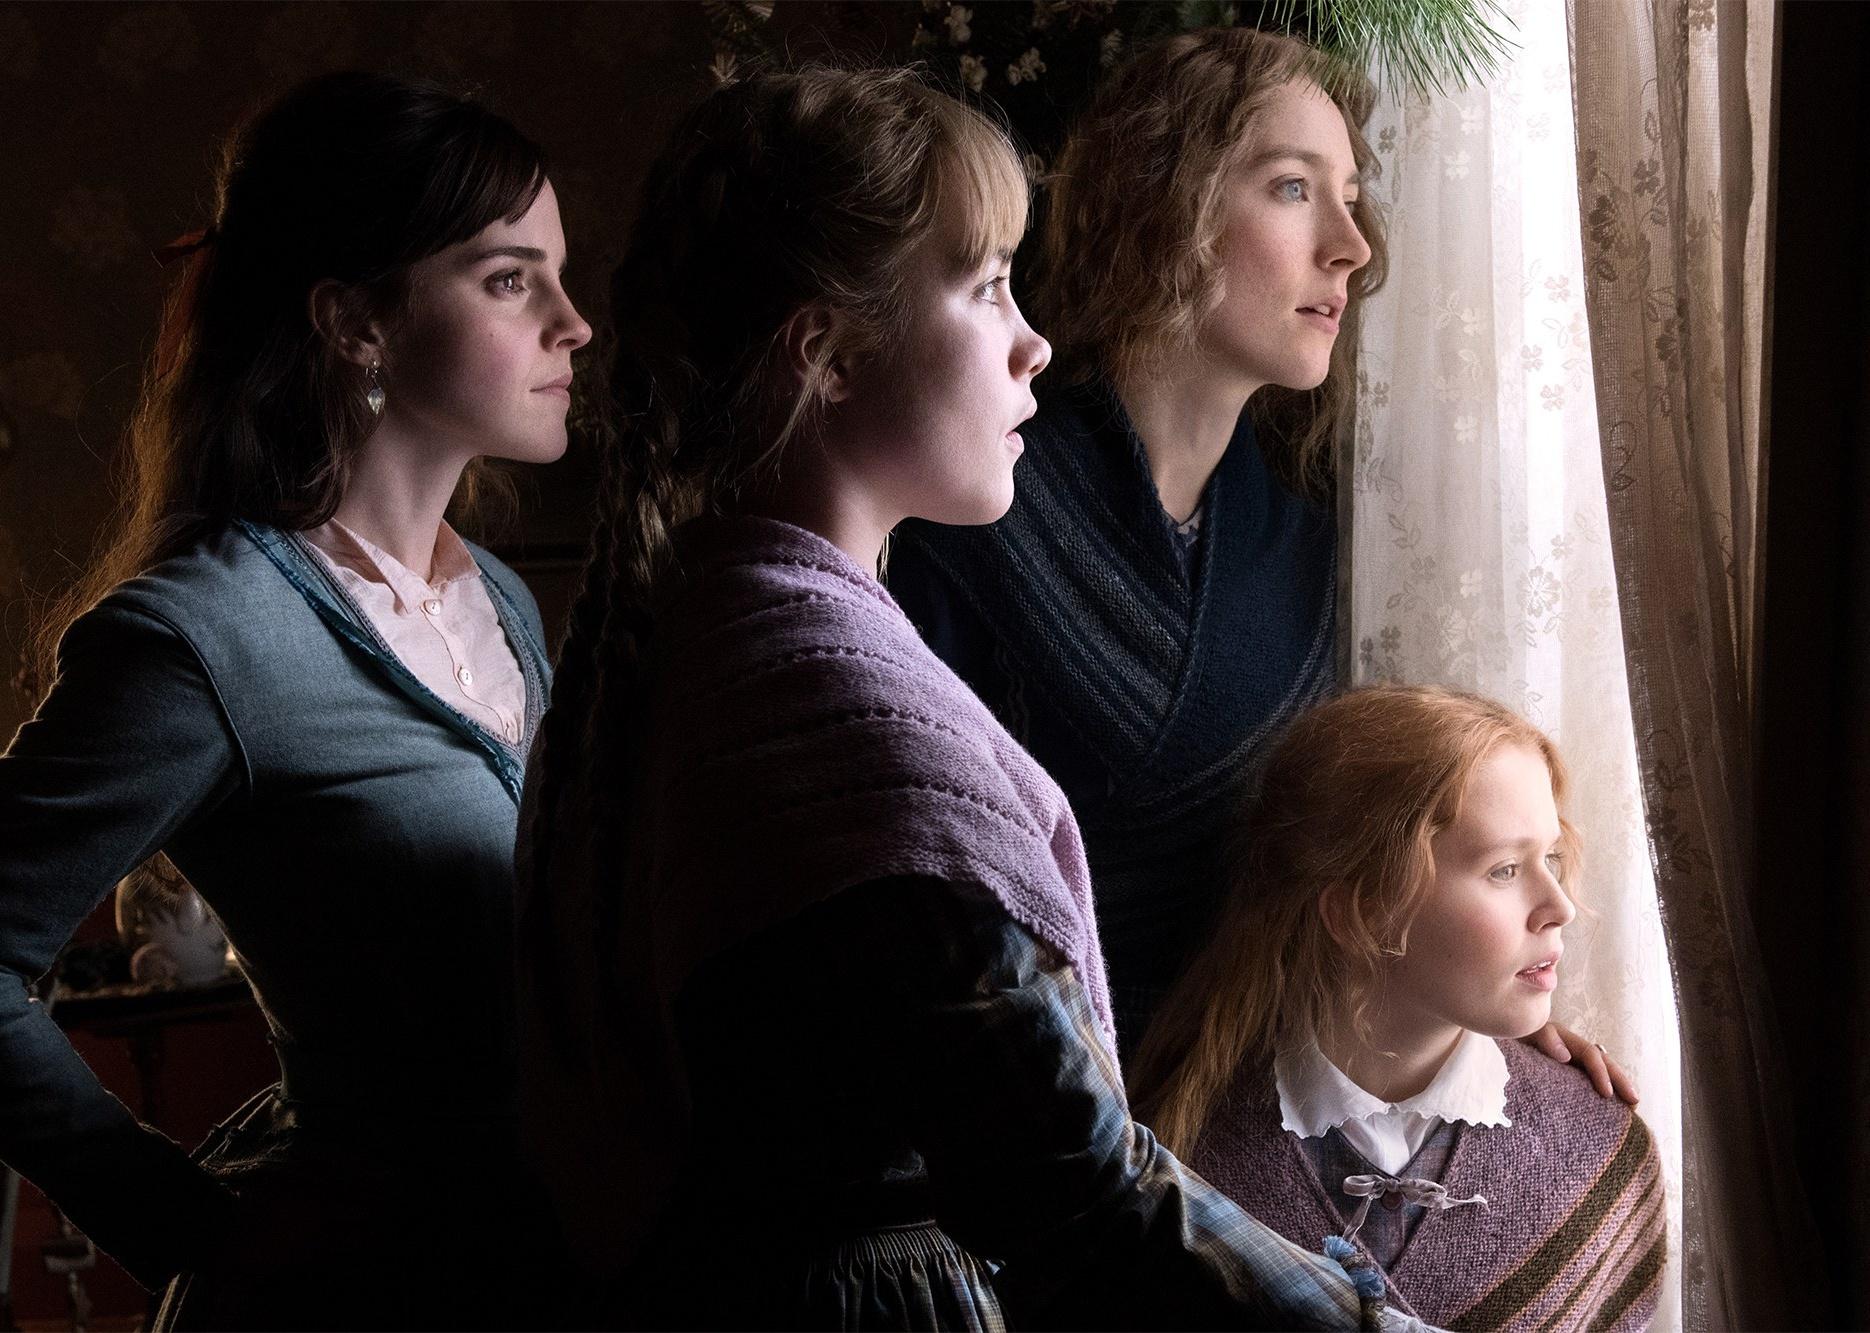 Emma Watson, Saoirse Ronan, Florence Pugh, and Eliza Scanlen looking out a window together.